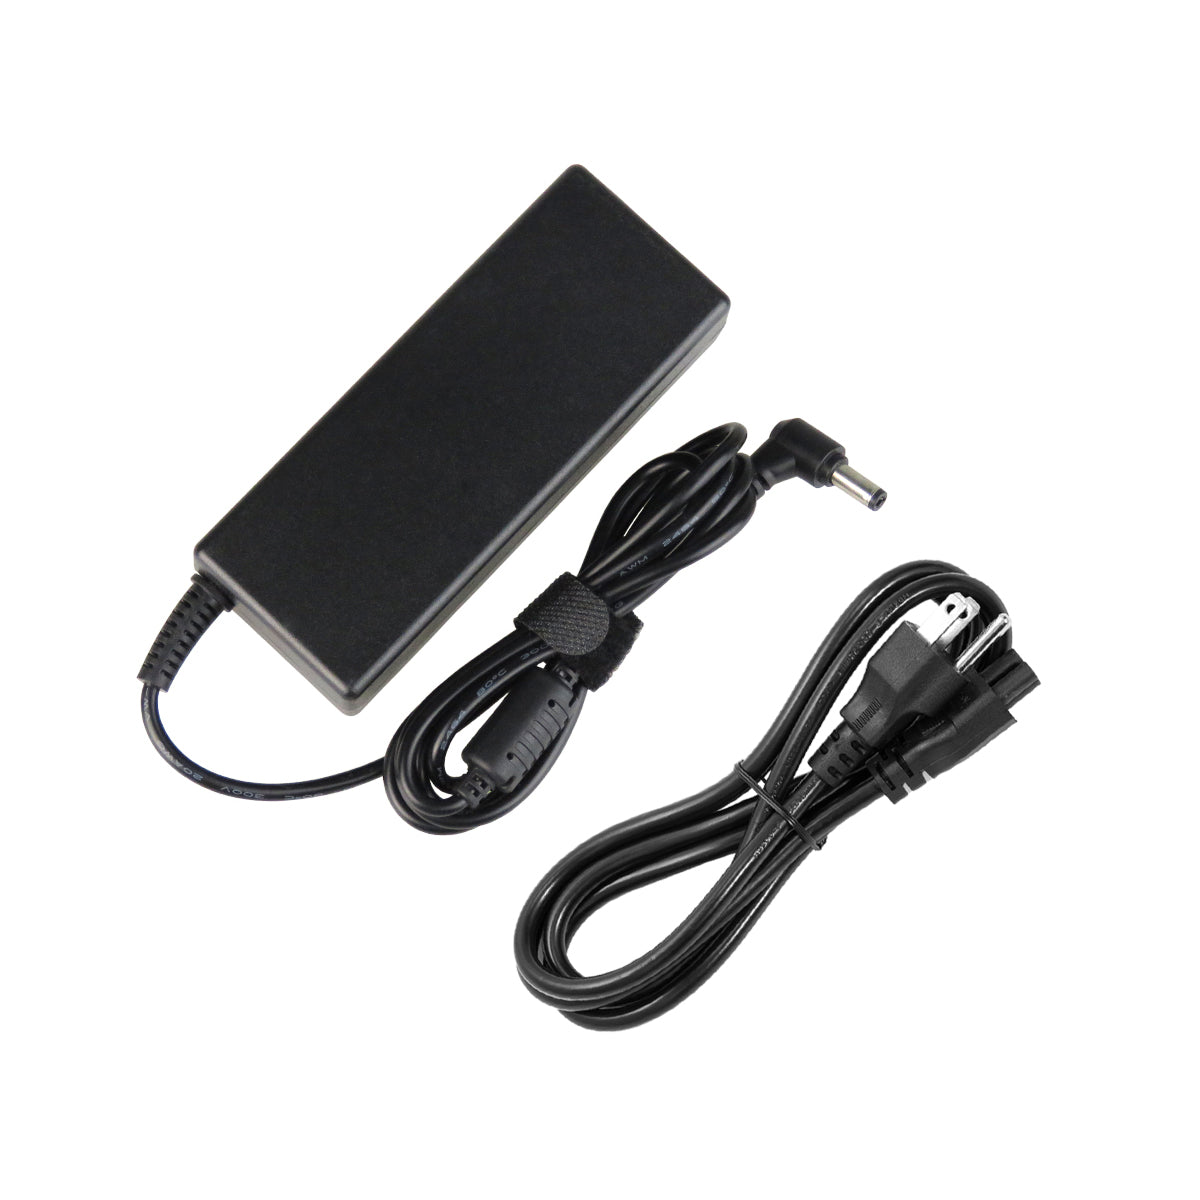 AC Adapter Charger for Lenovo 3000 G410 Notebook.